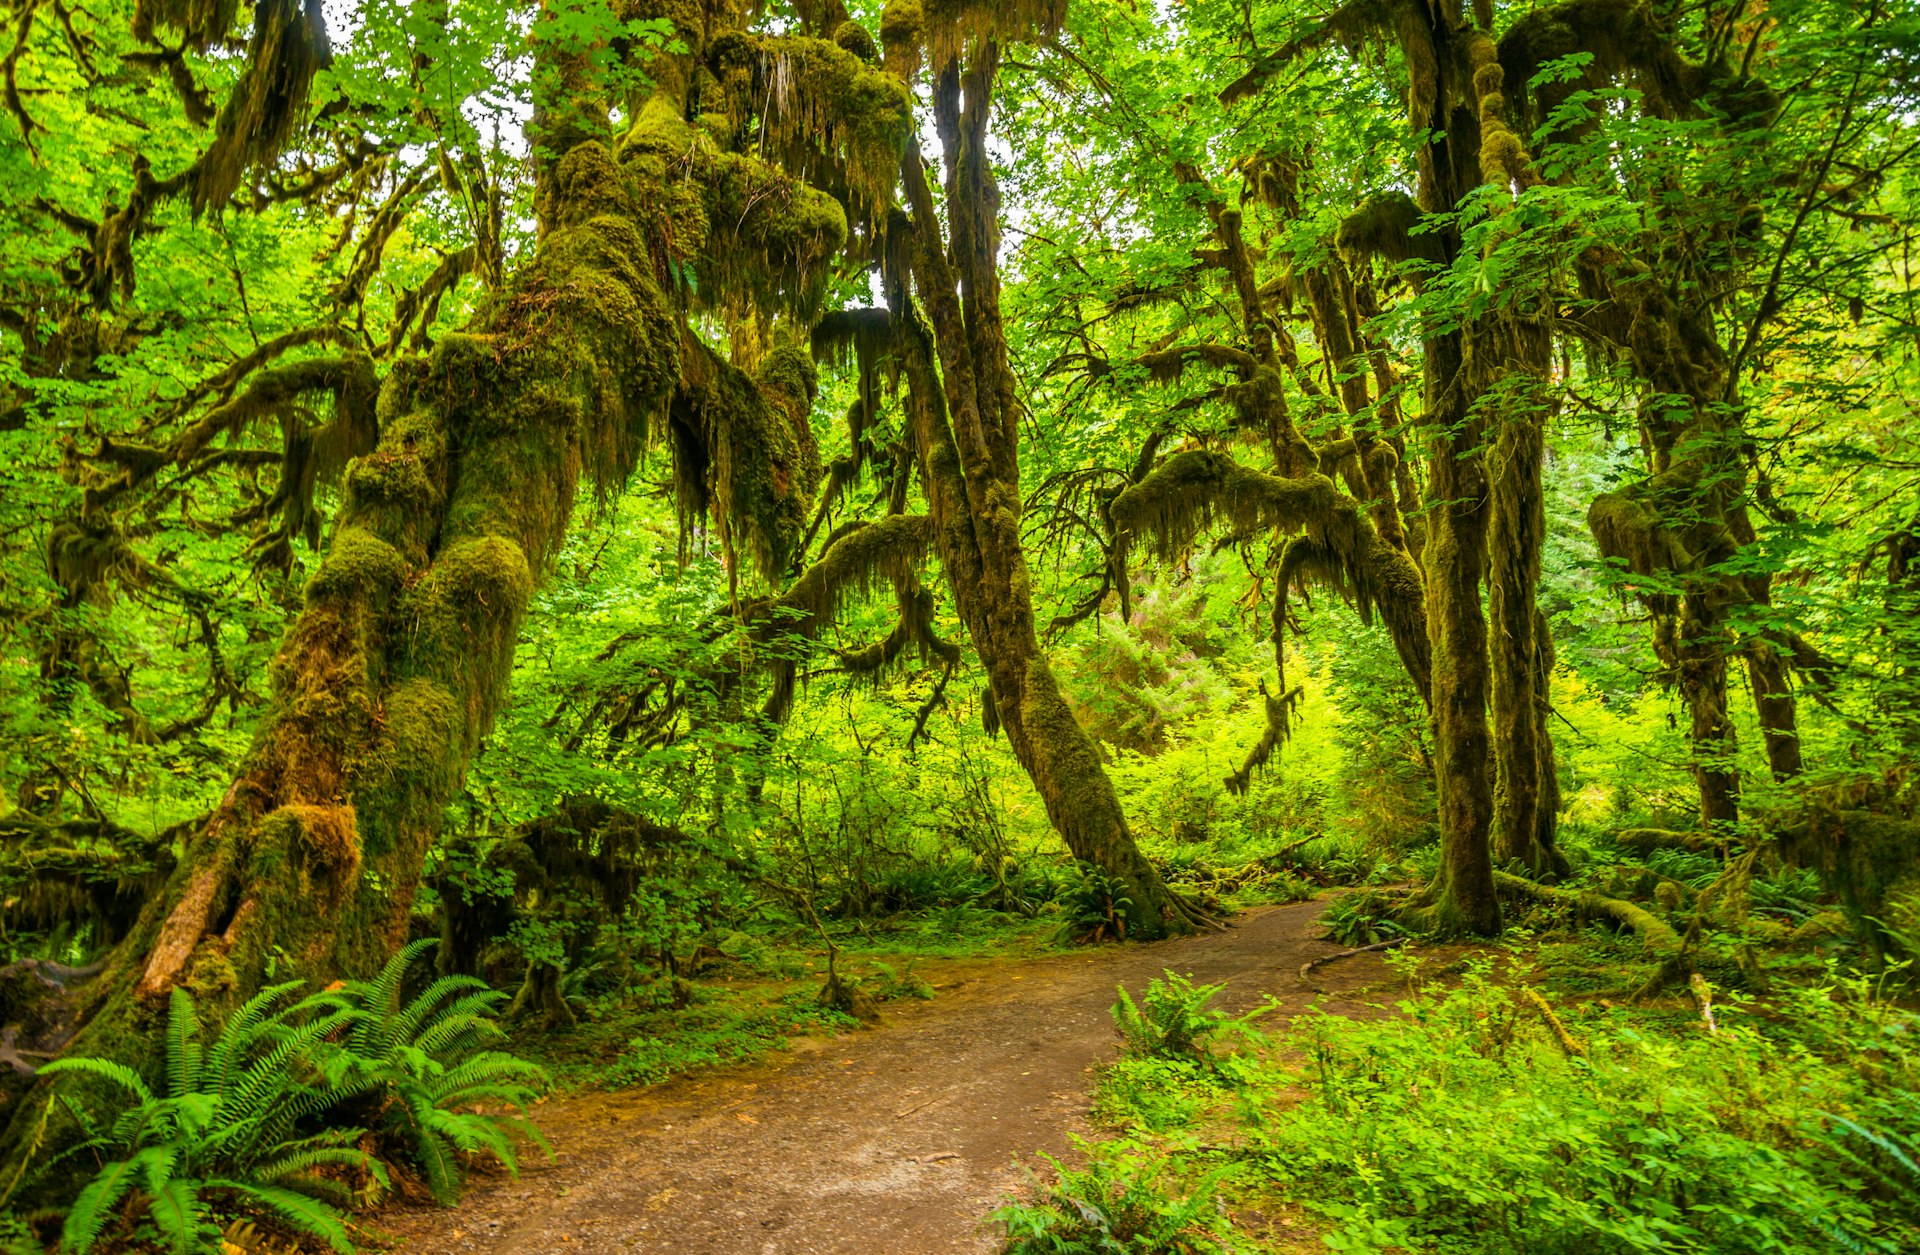 Moss covered trees at Hoh Rain Forest in Olympic National Park, Washington.